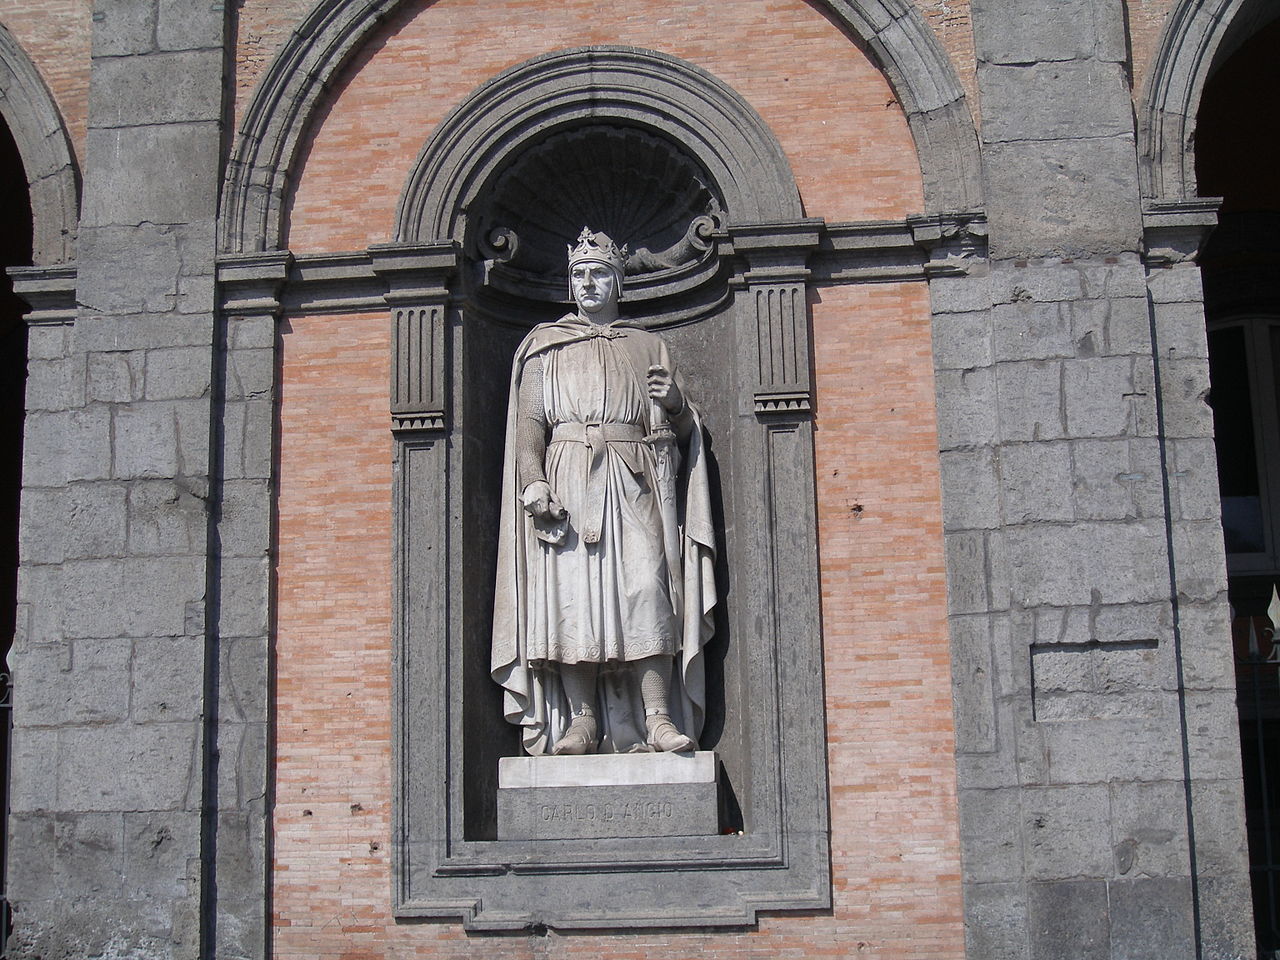 https://commons.wikimedia.org/wiki/Category:Statue_of_Charles_I_of_Anjou,_Royal_Palace_(Naples)#/media/File:Carlo_d'Angio.jpg